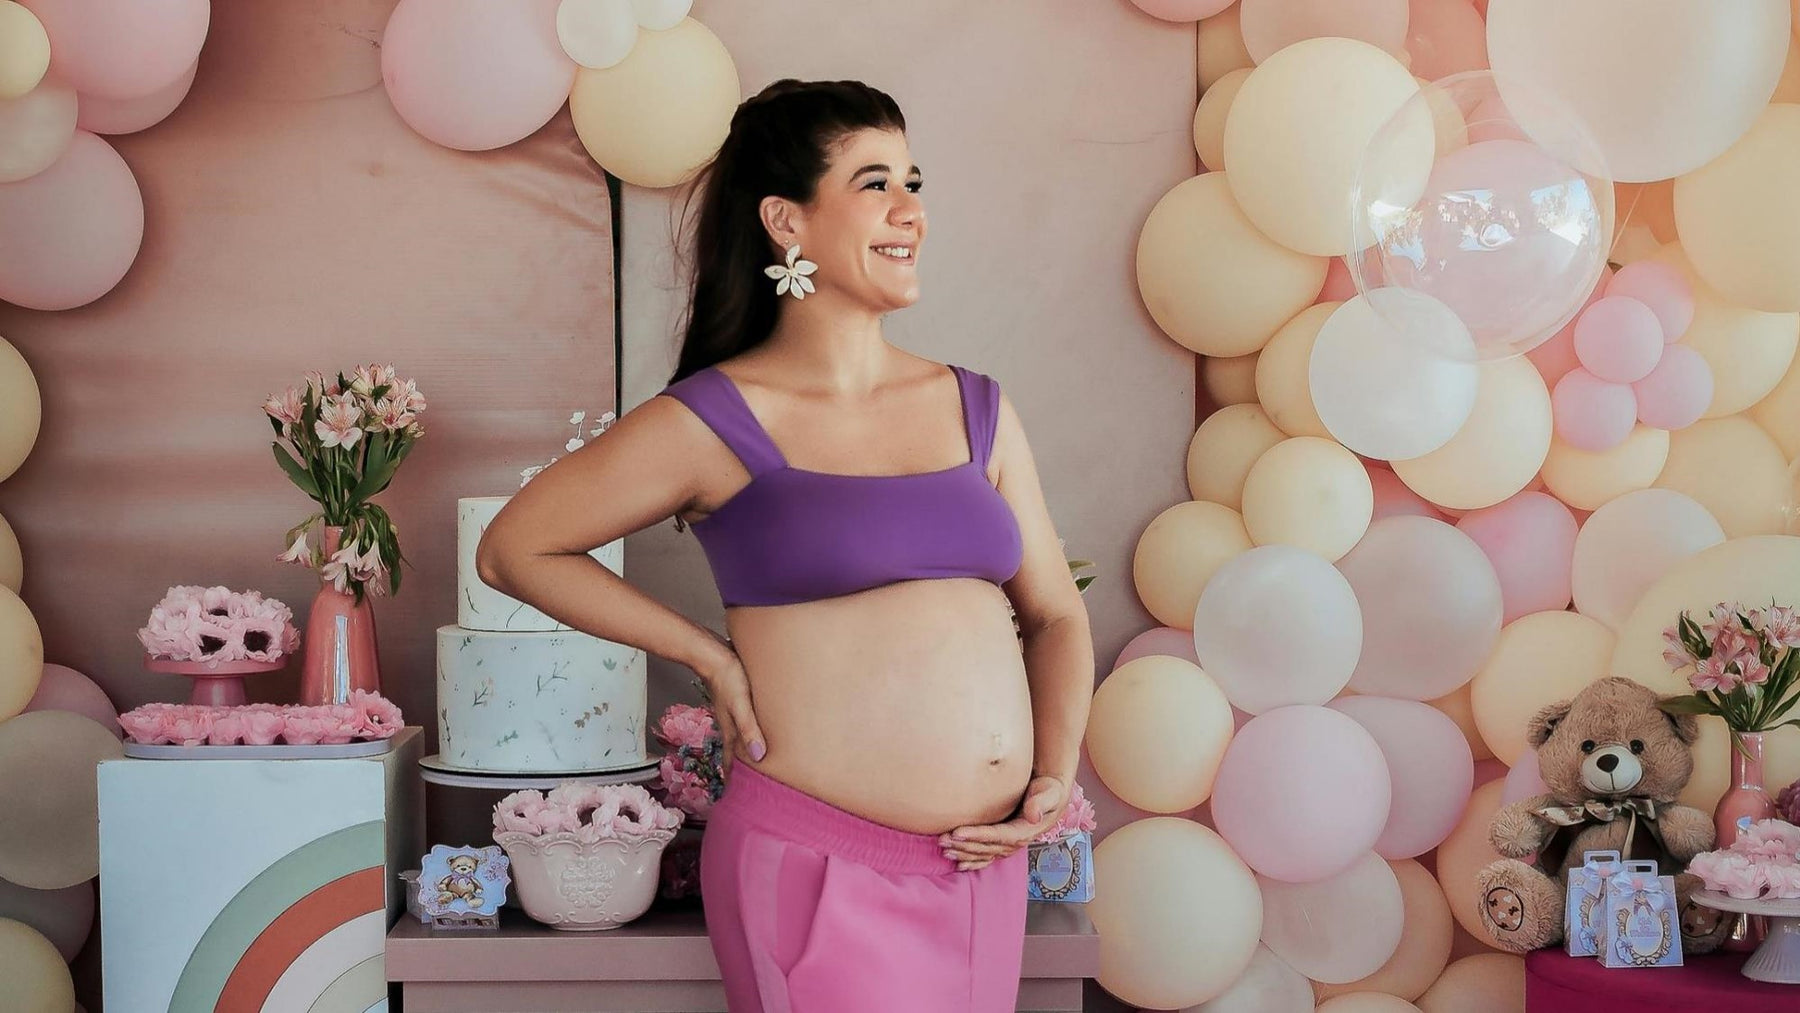 A pregnant mom is posing at her baby shower with balloons and cakes. Baby shower, ideas, activities, themes, games.